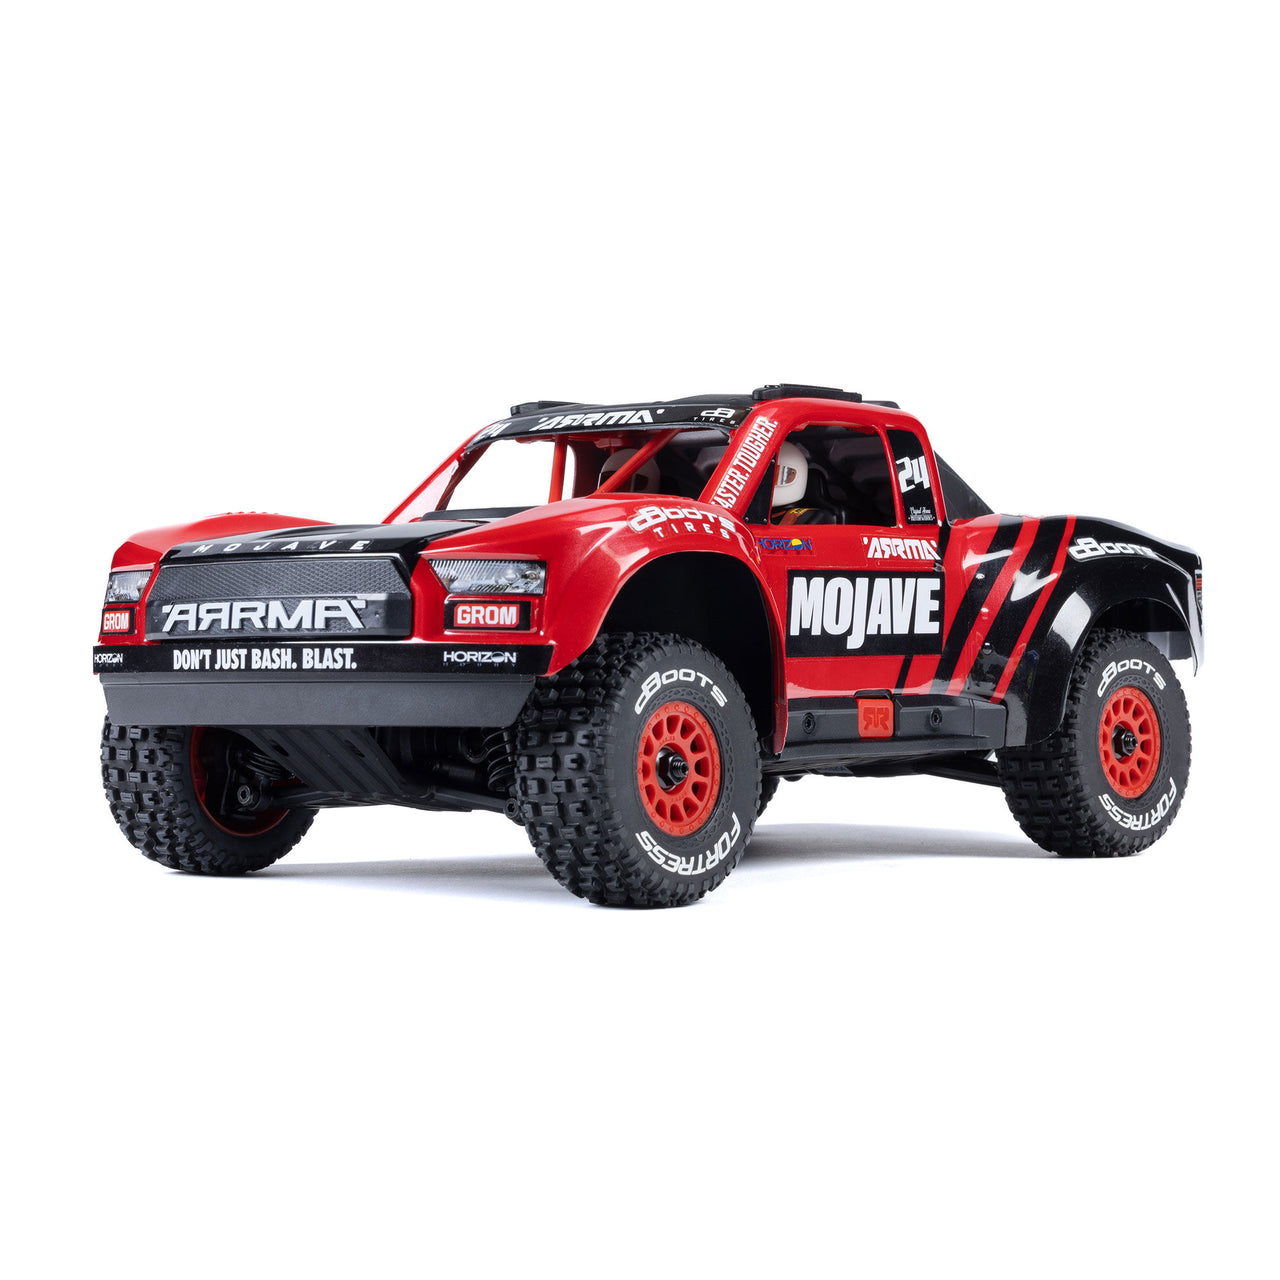 ARA2104T1 MOJAVE GROM MEGA 380 Brushed 4X4 Small Scale Desert Truck RTR with Battery & Charger, Red/Black